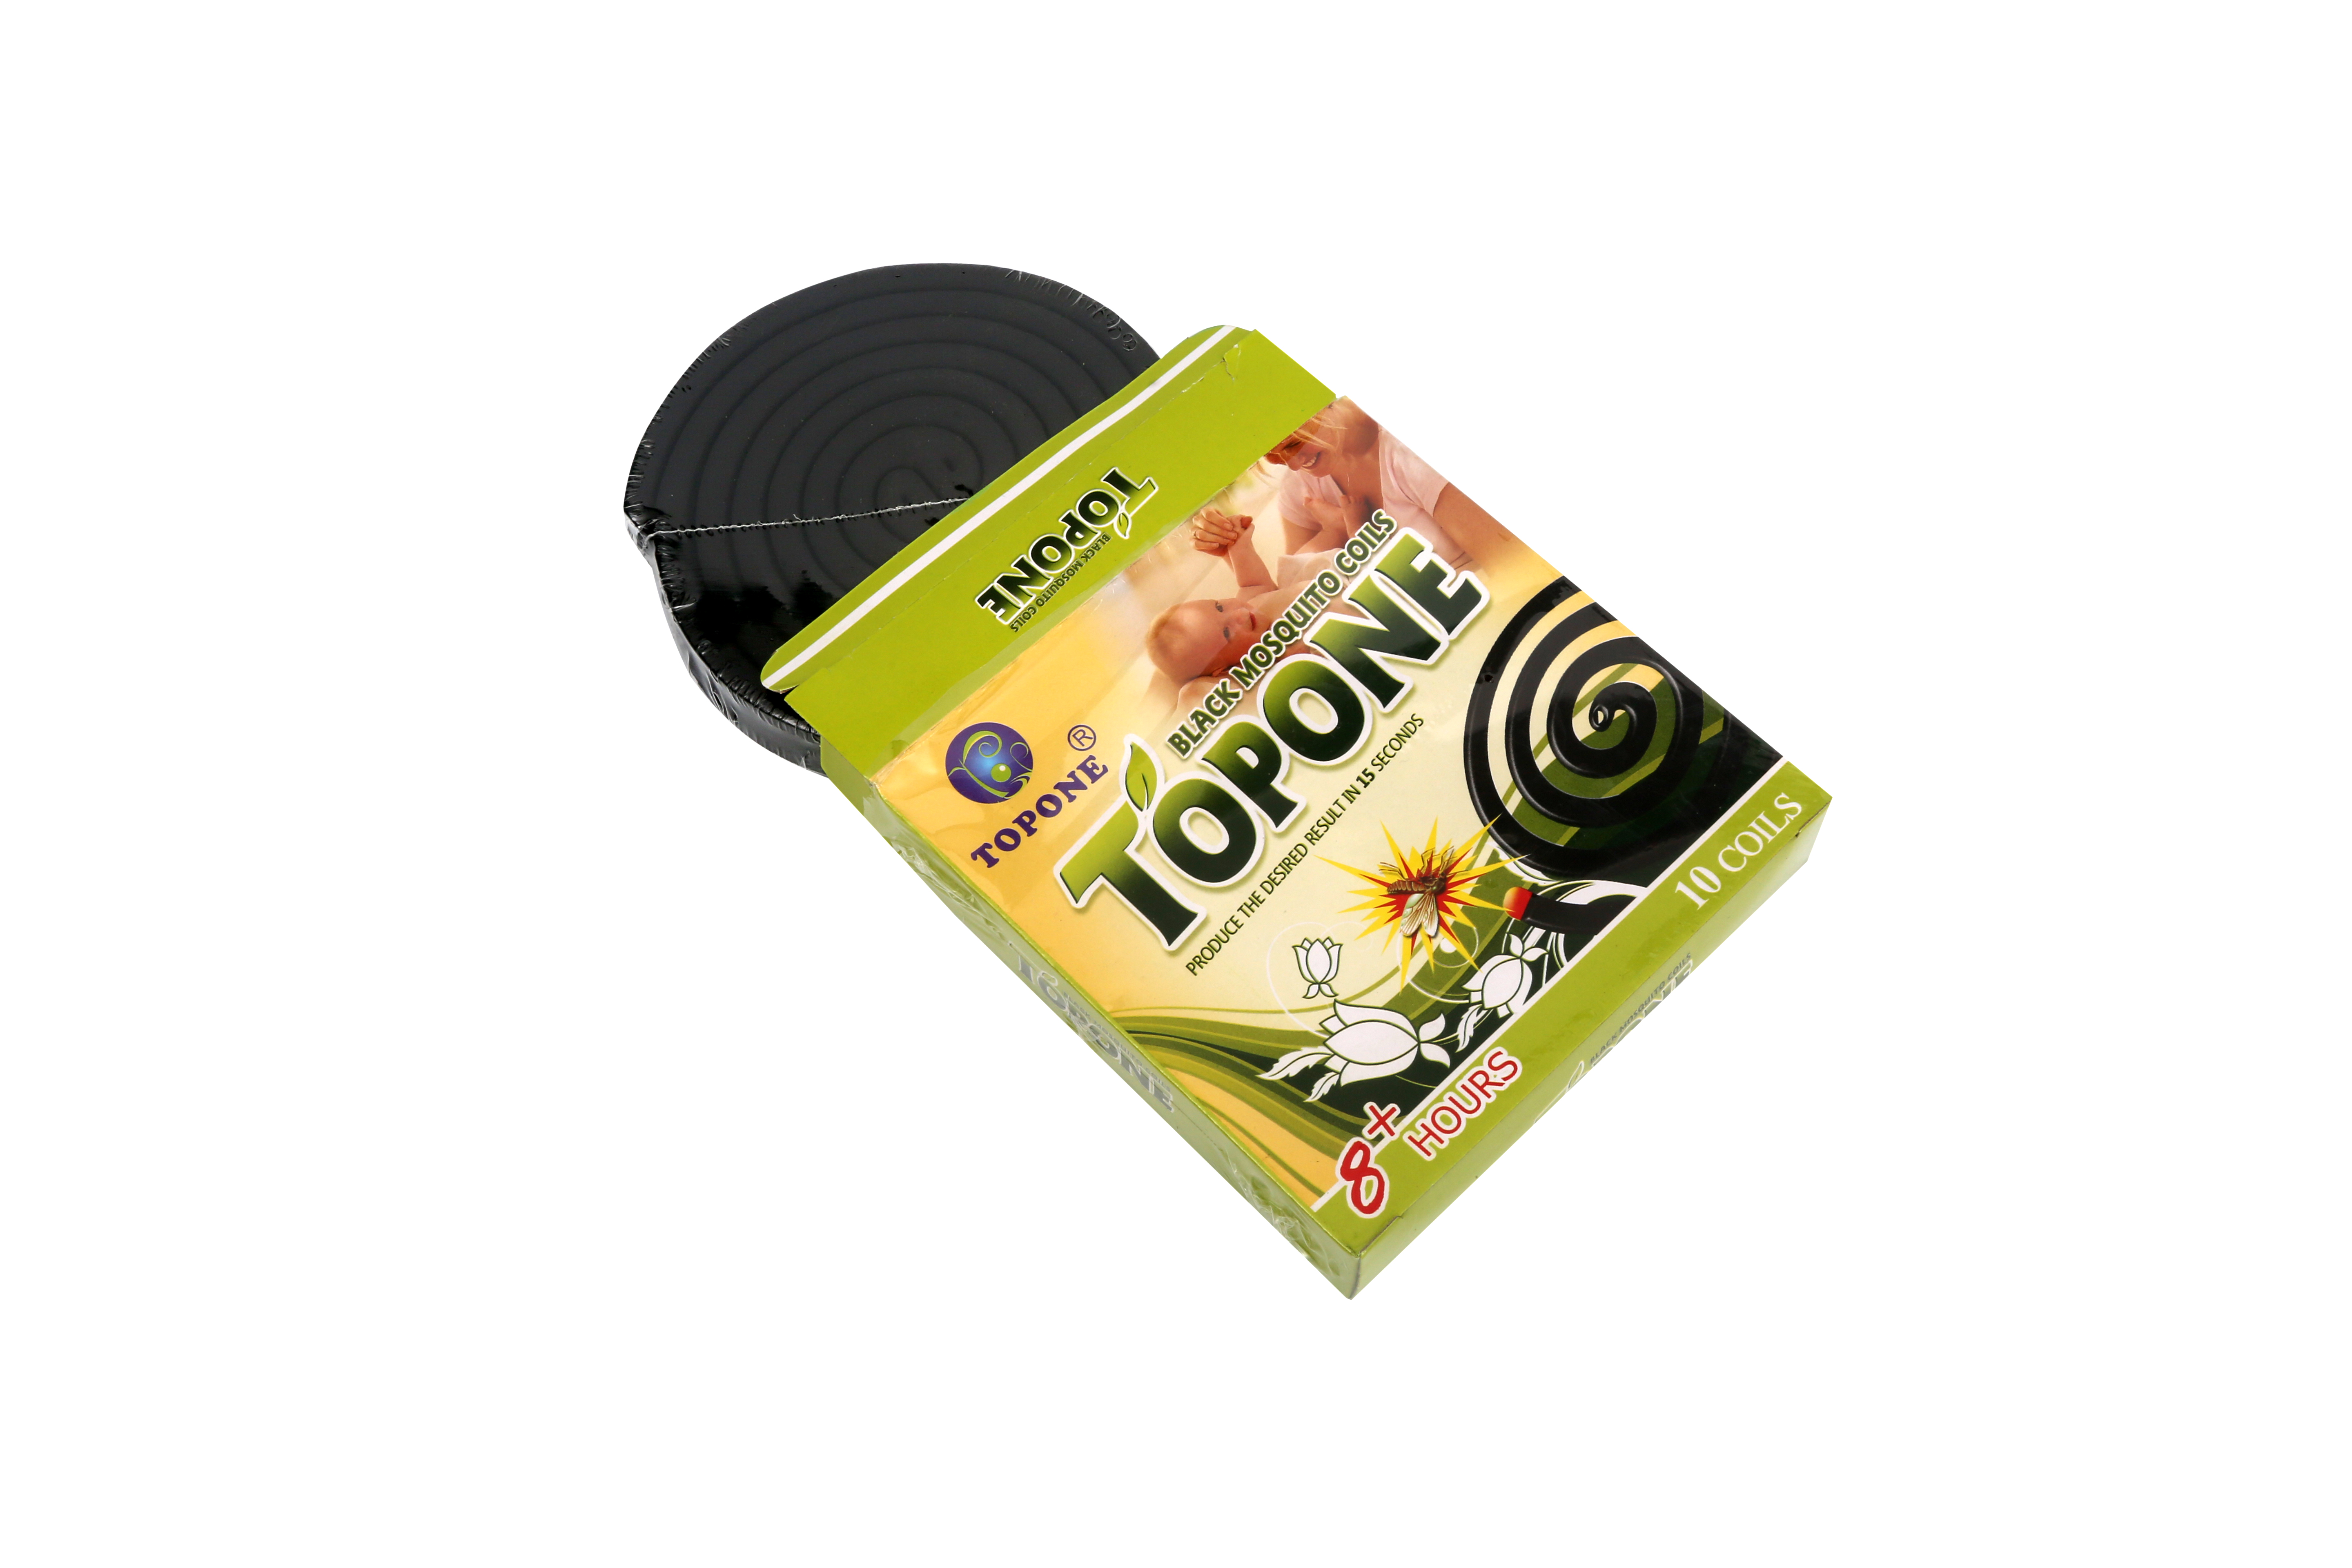 Micro smoke mosquito coil, safe and efficient mosquito repellent tool